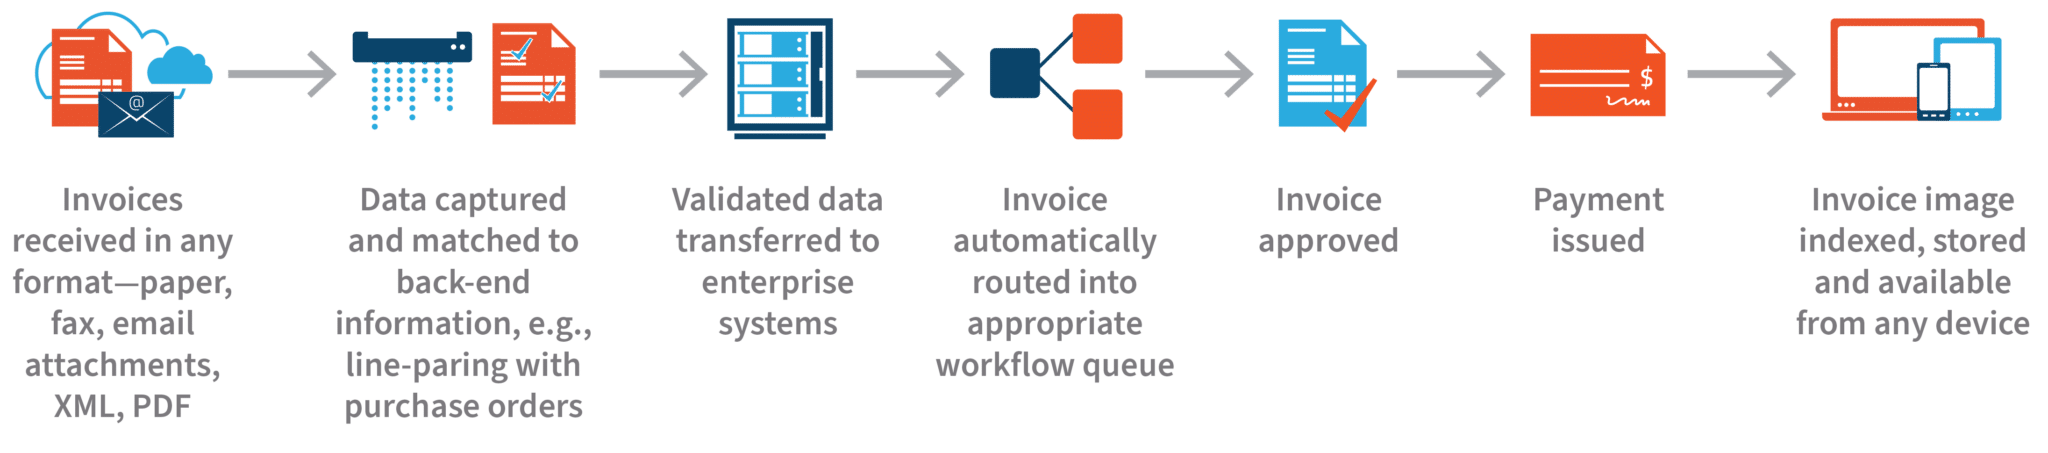 Accounts Payable Automation Workflow